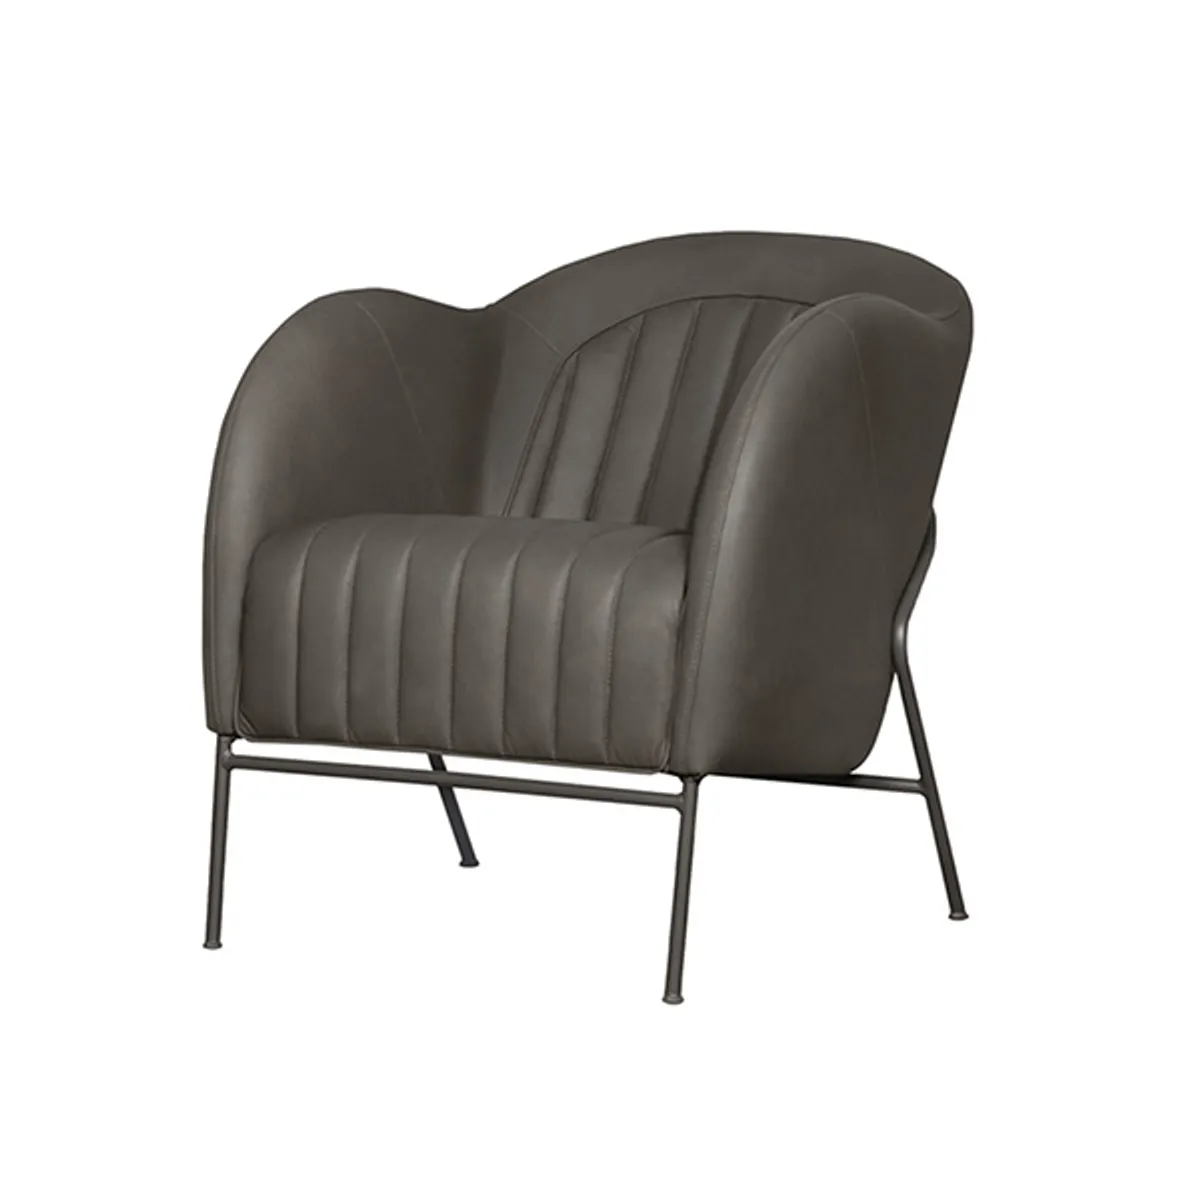 Emilie Lounge Chair Aniline Grey Inside Out Contracts